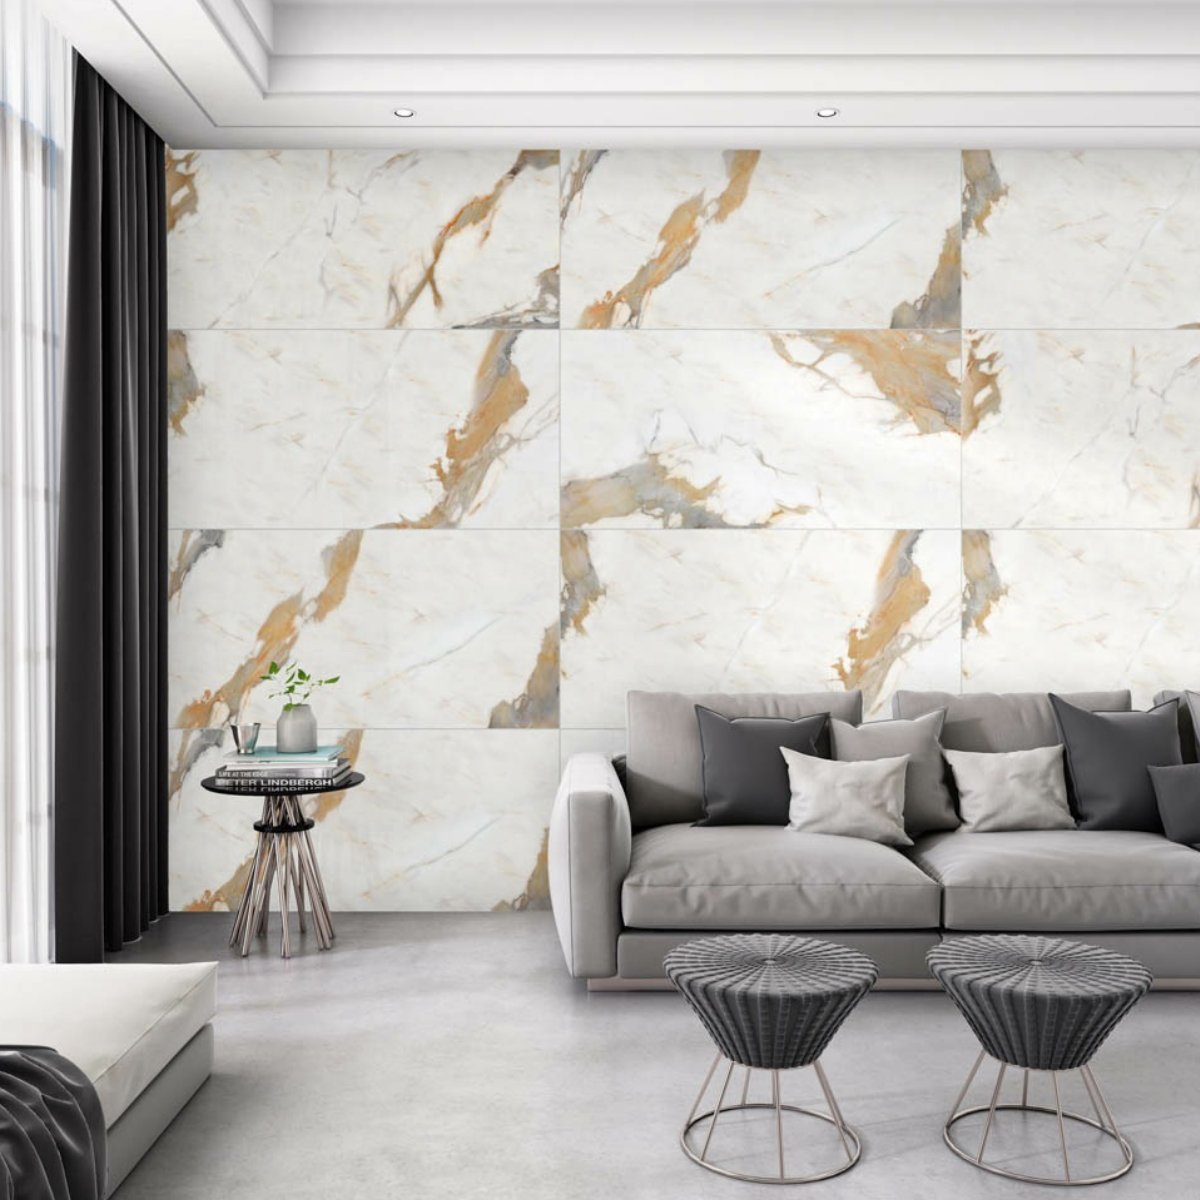 AMAZE STATUARIO PORCELAIN TILES in beige and cream color with having size of 600x1200 mm